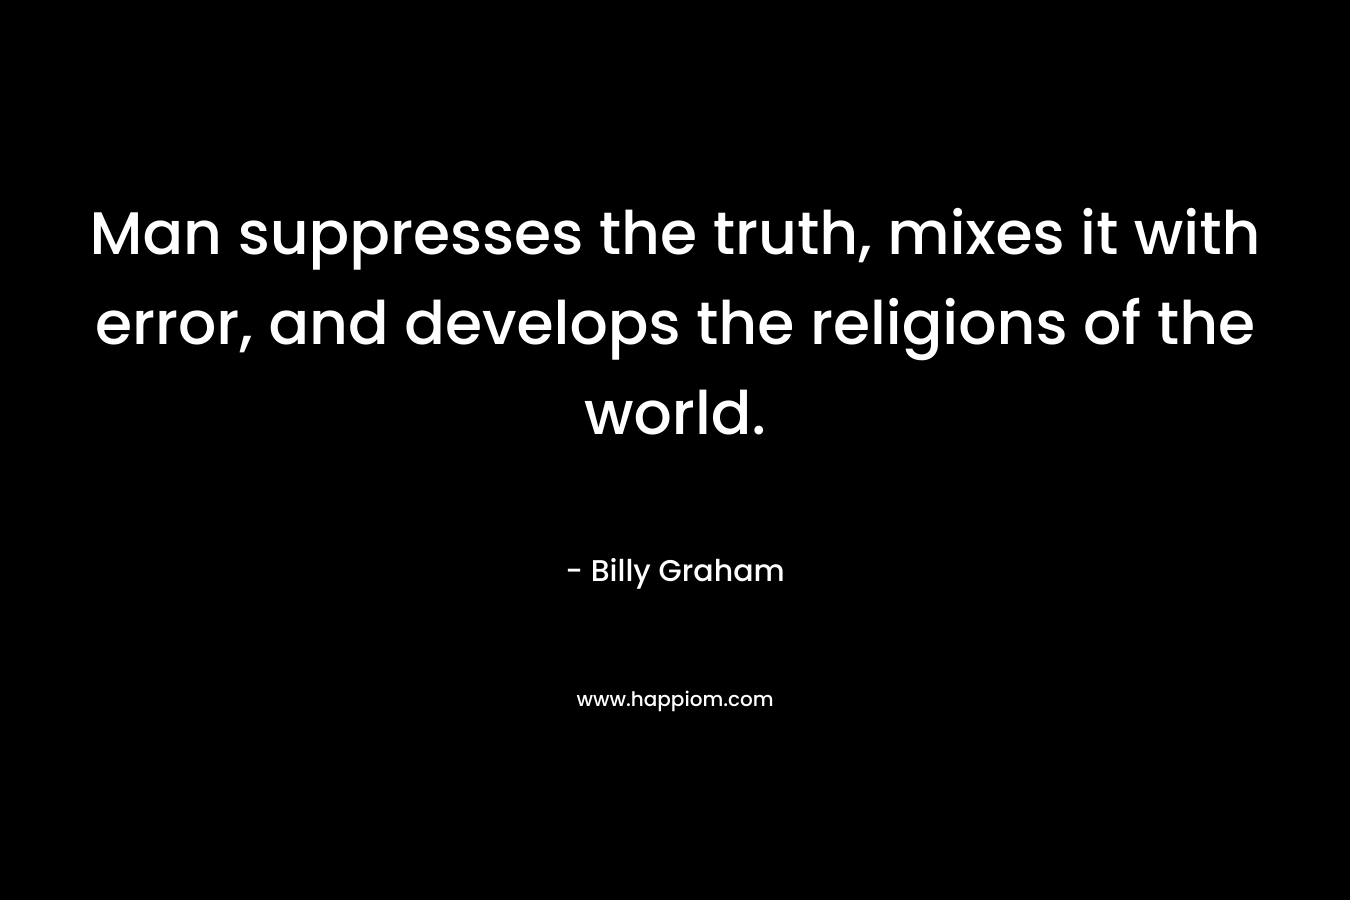 Man suppresses the truth, mixes it with error, and develops the religions of the world.